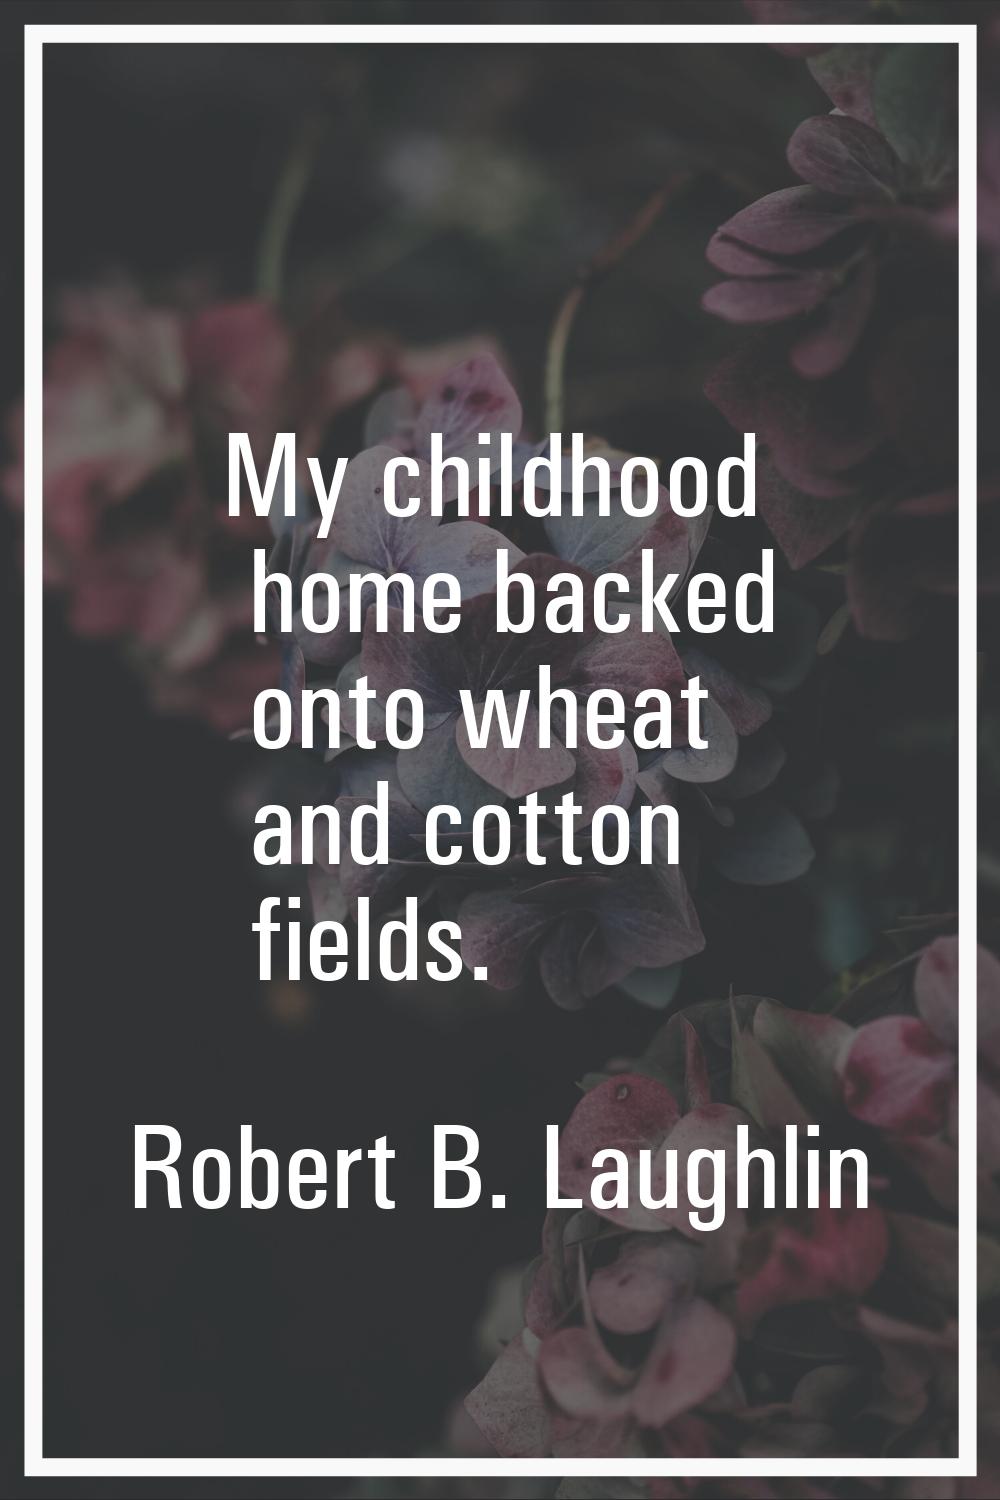 My childhood home backed onto wheat and cotton fields.